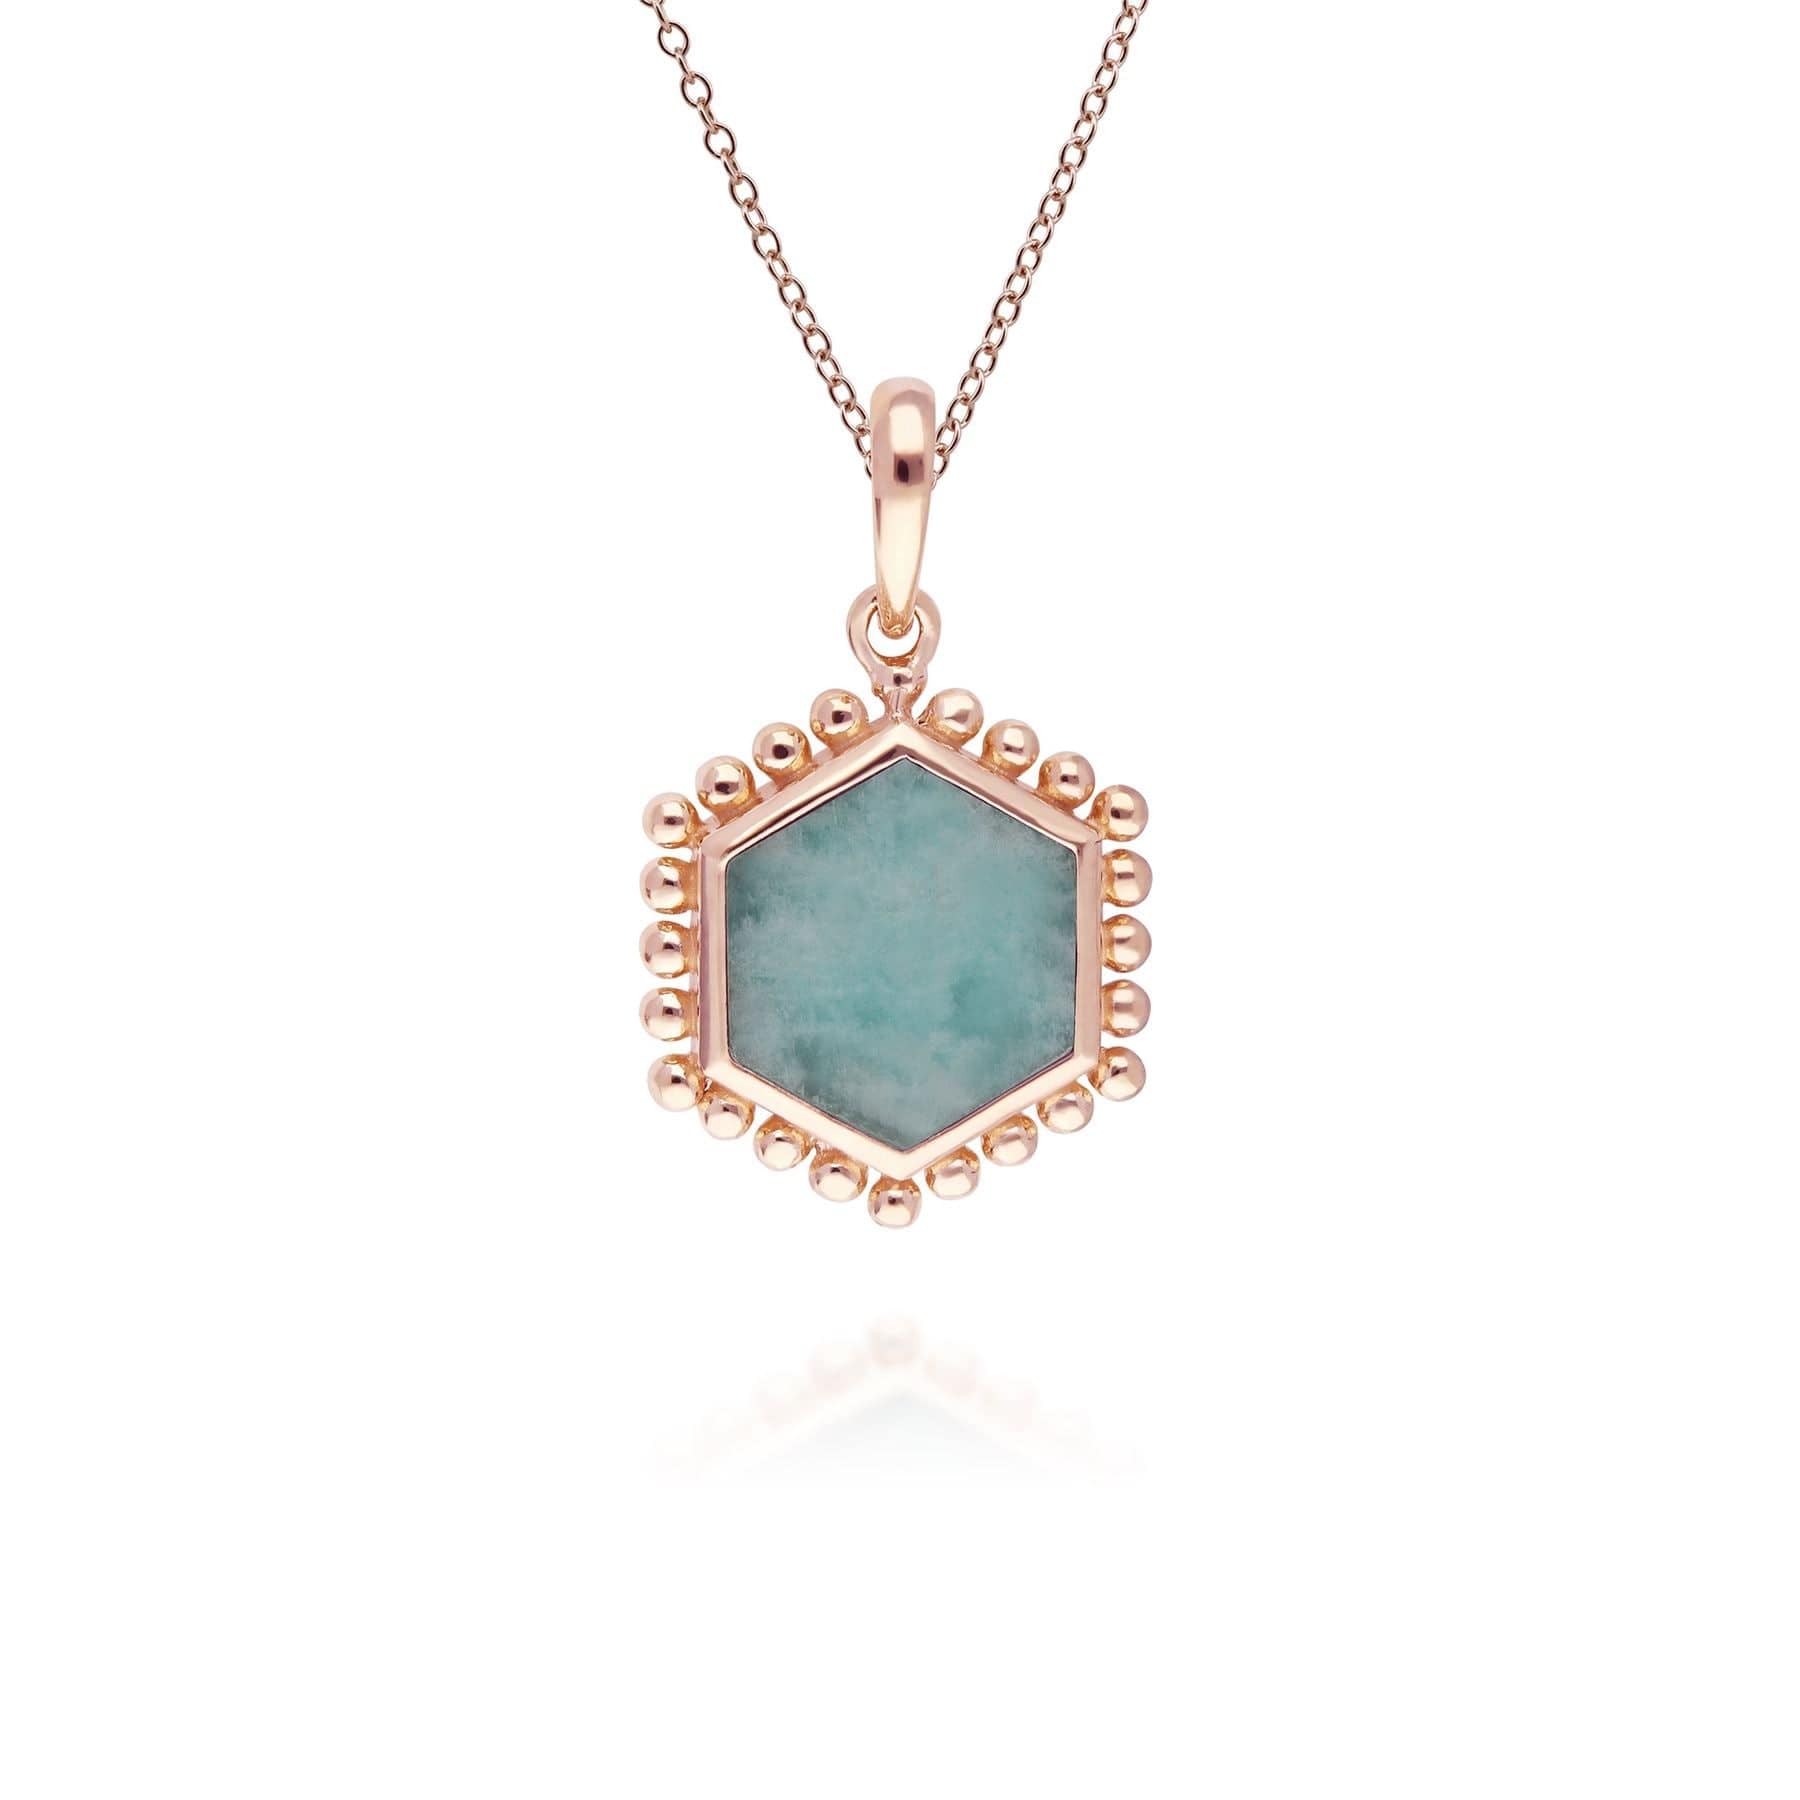 Image of Amazonite Flat Slice Hex Pendant Necklace in Rose Gold Plated Sterling Silver